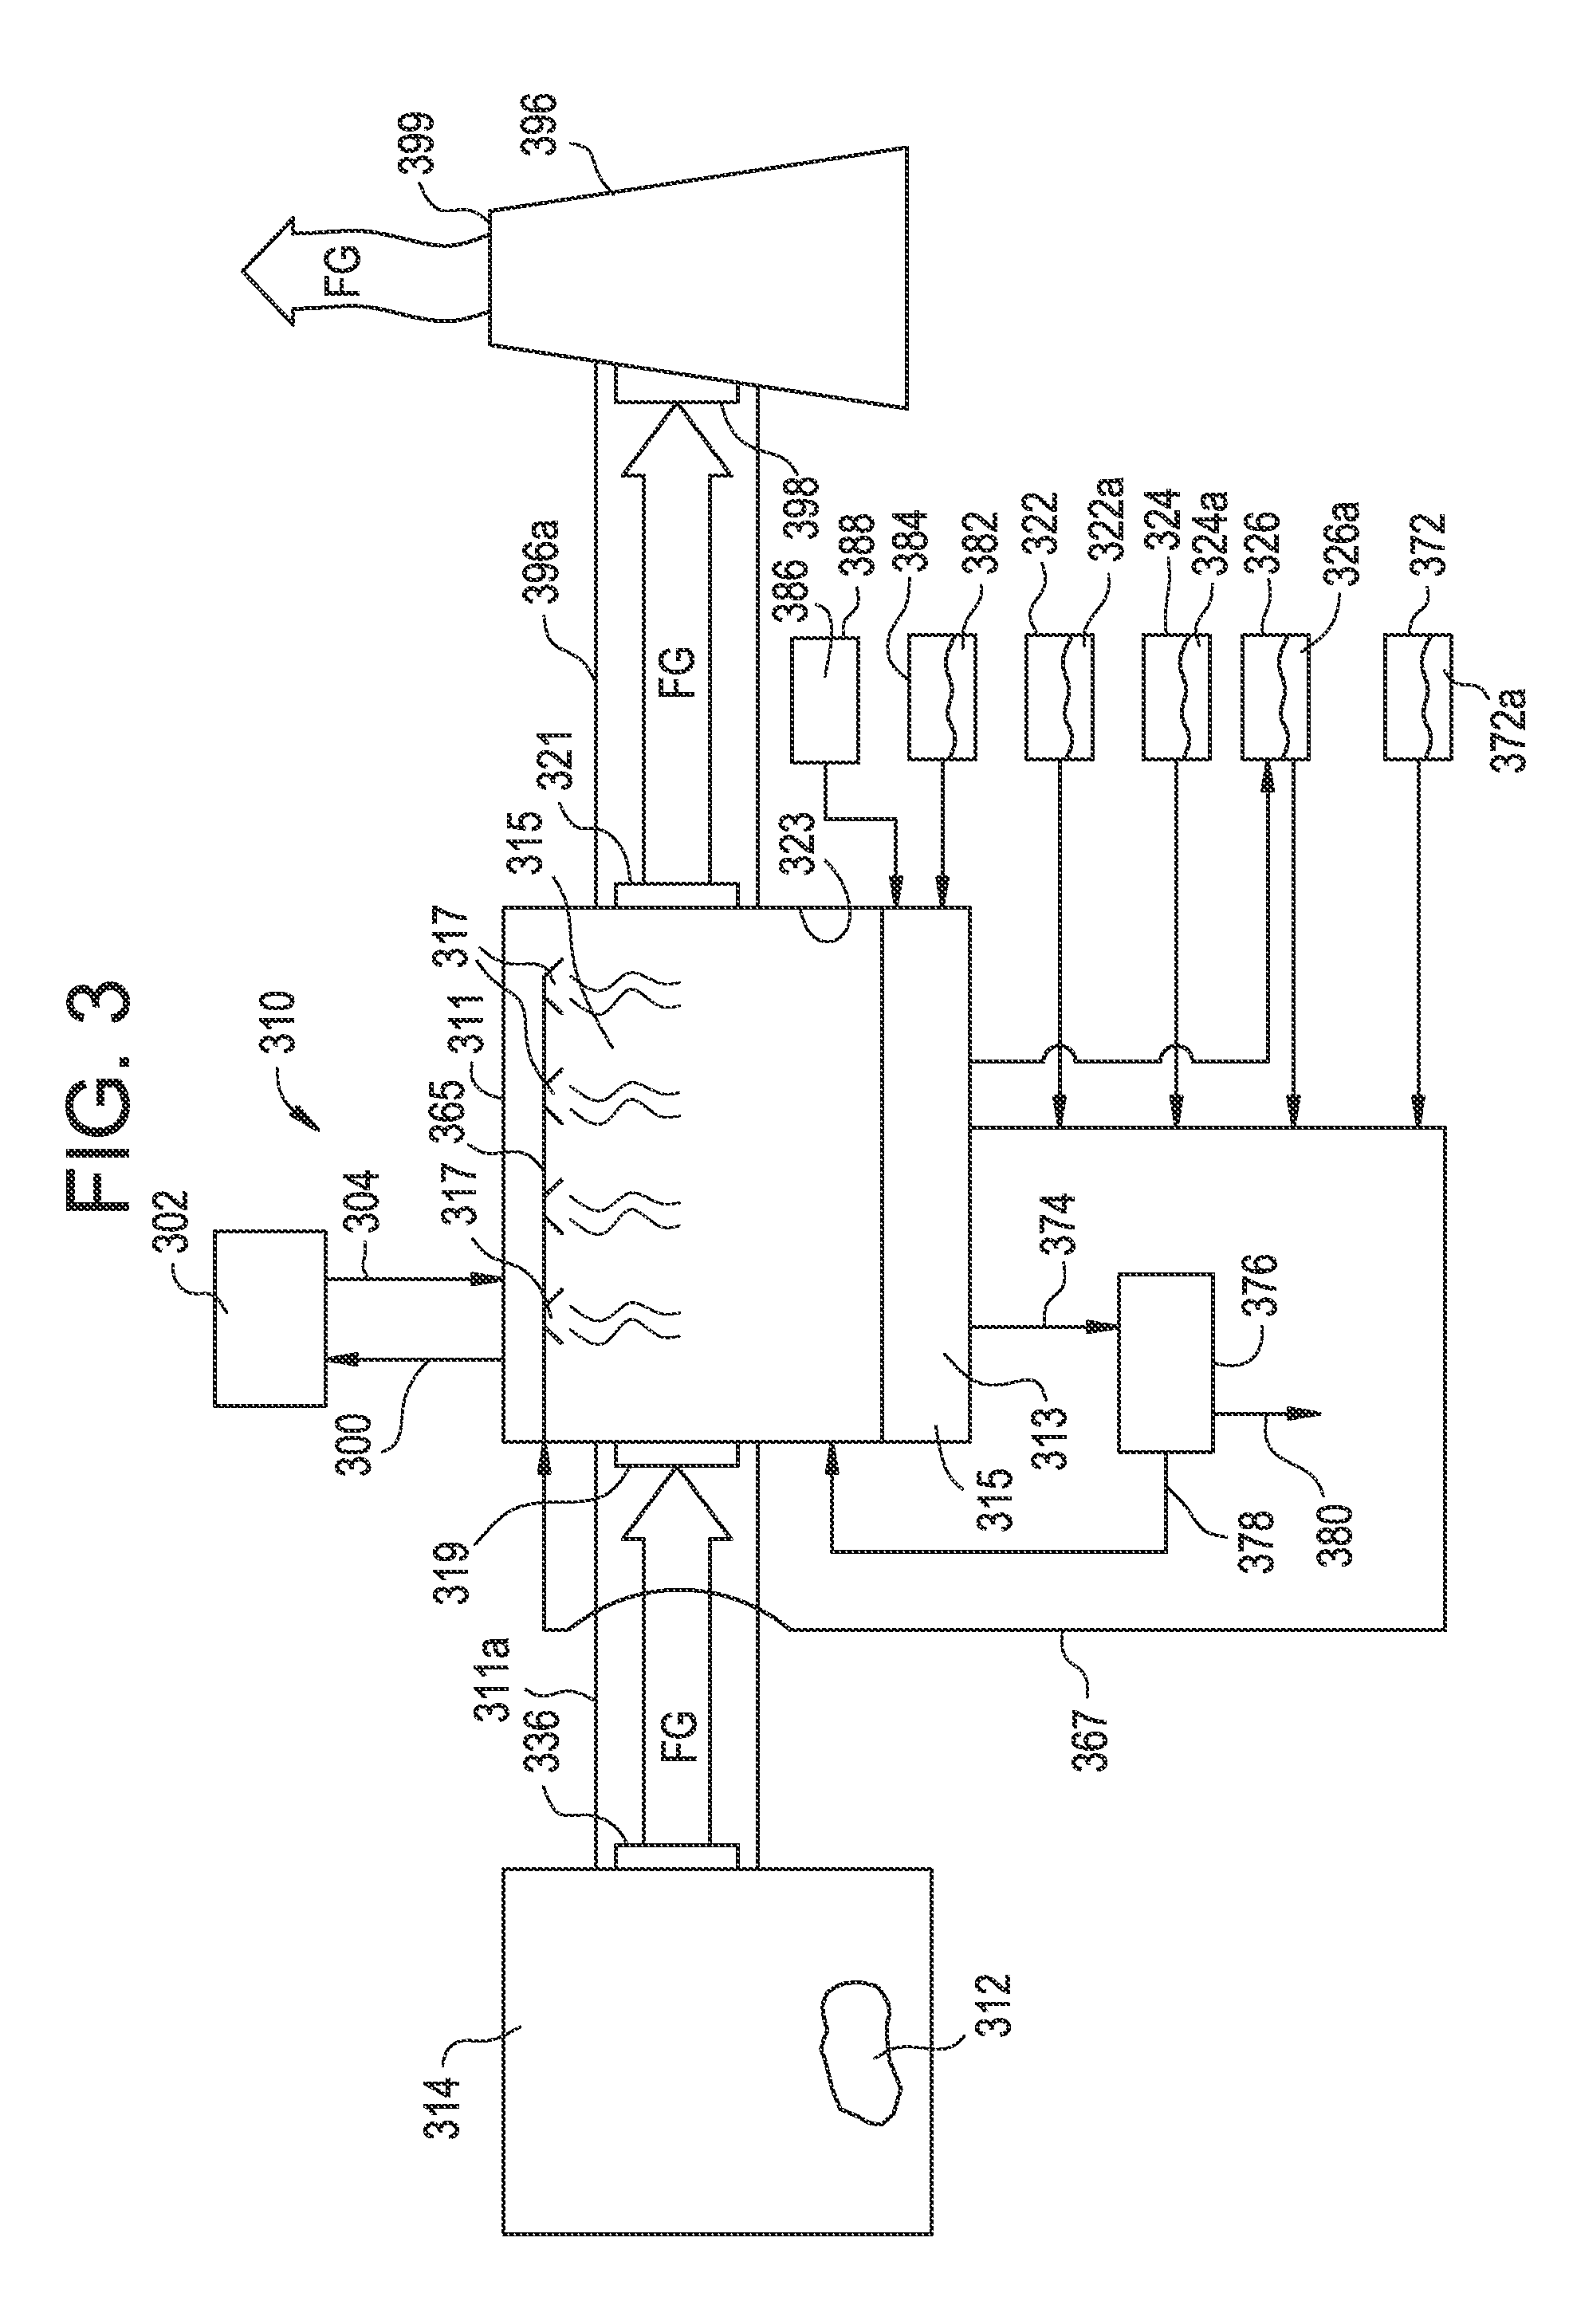 Oxidation system and method for cleaning waste combustion flue gas